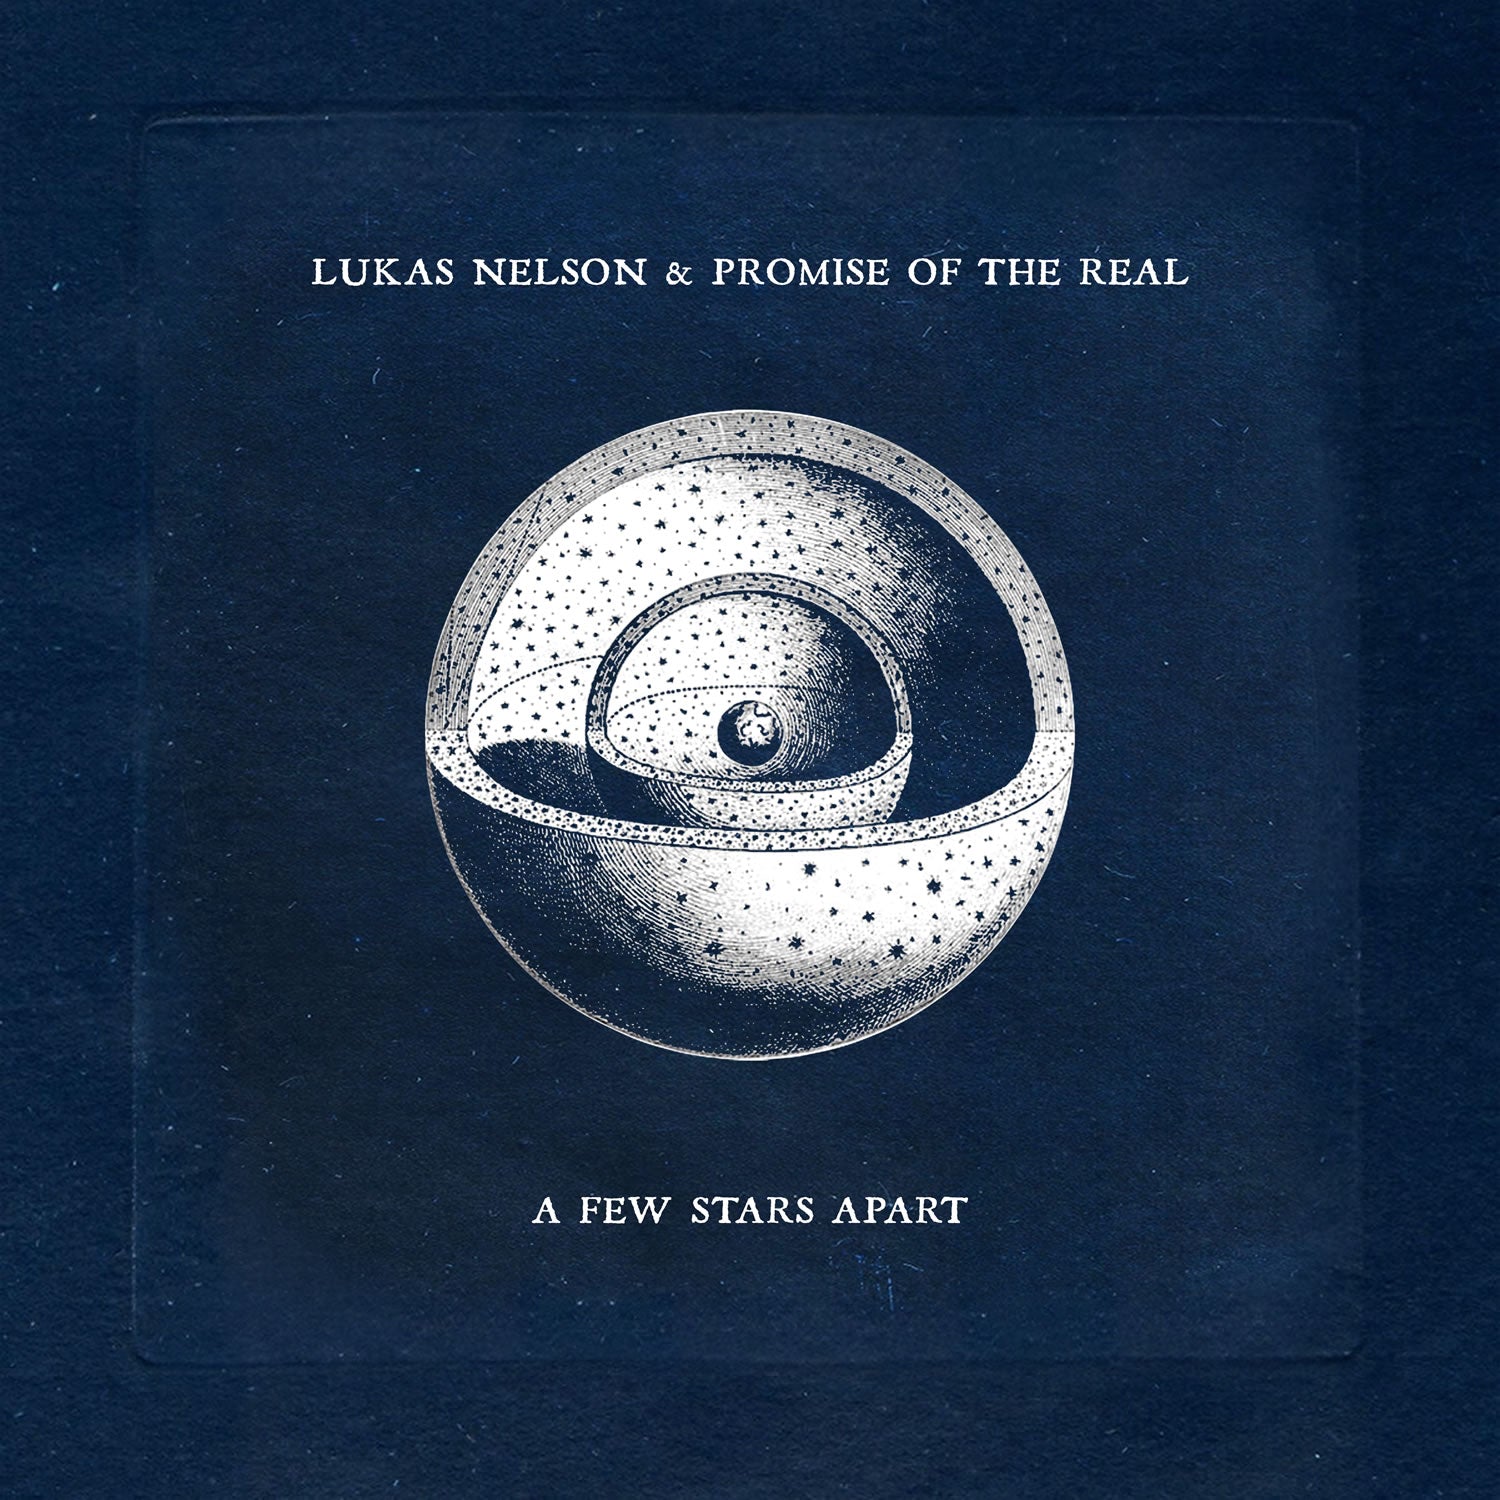 Lukas Nelson & Promise of the Real - A Few Stars Apart (Vinyl LP)